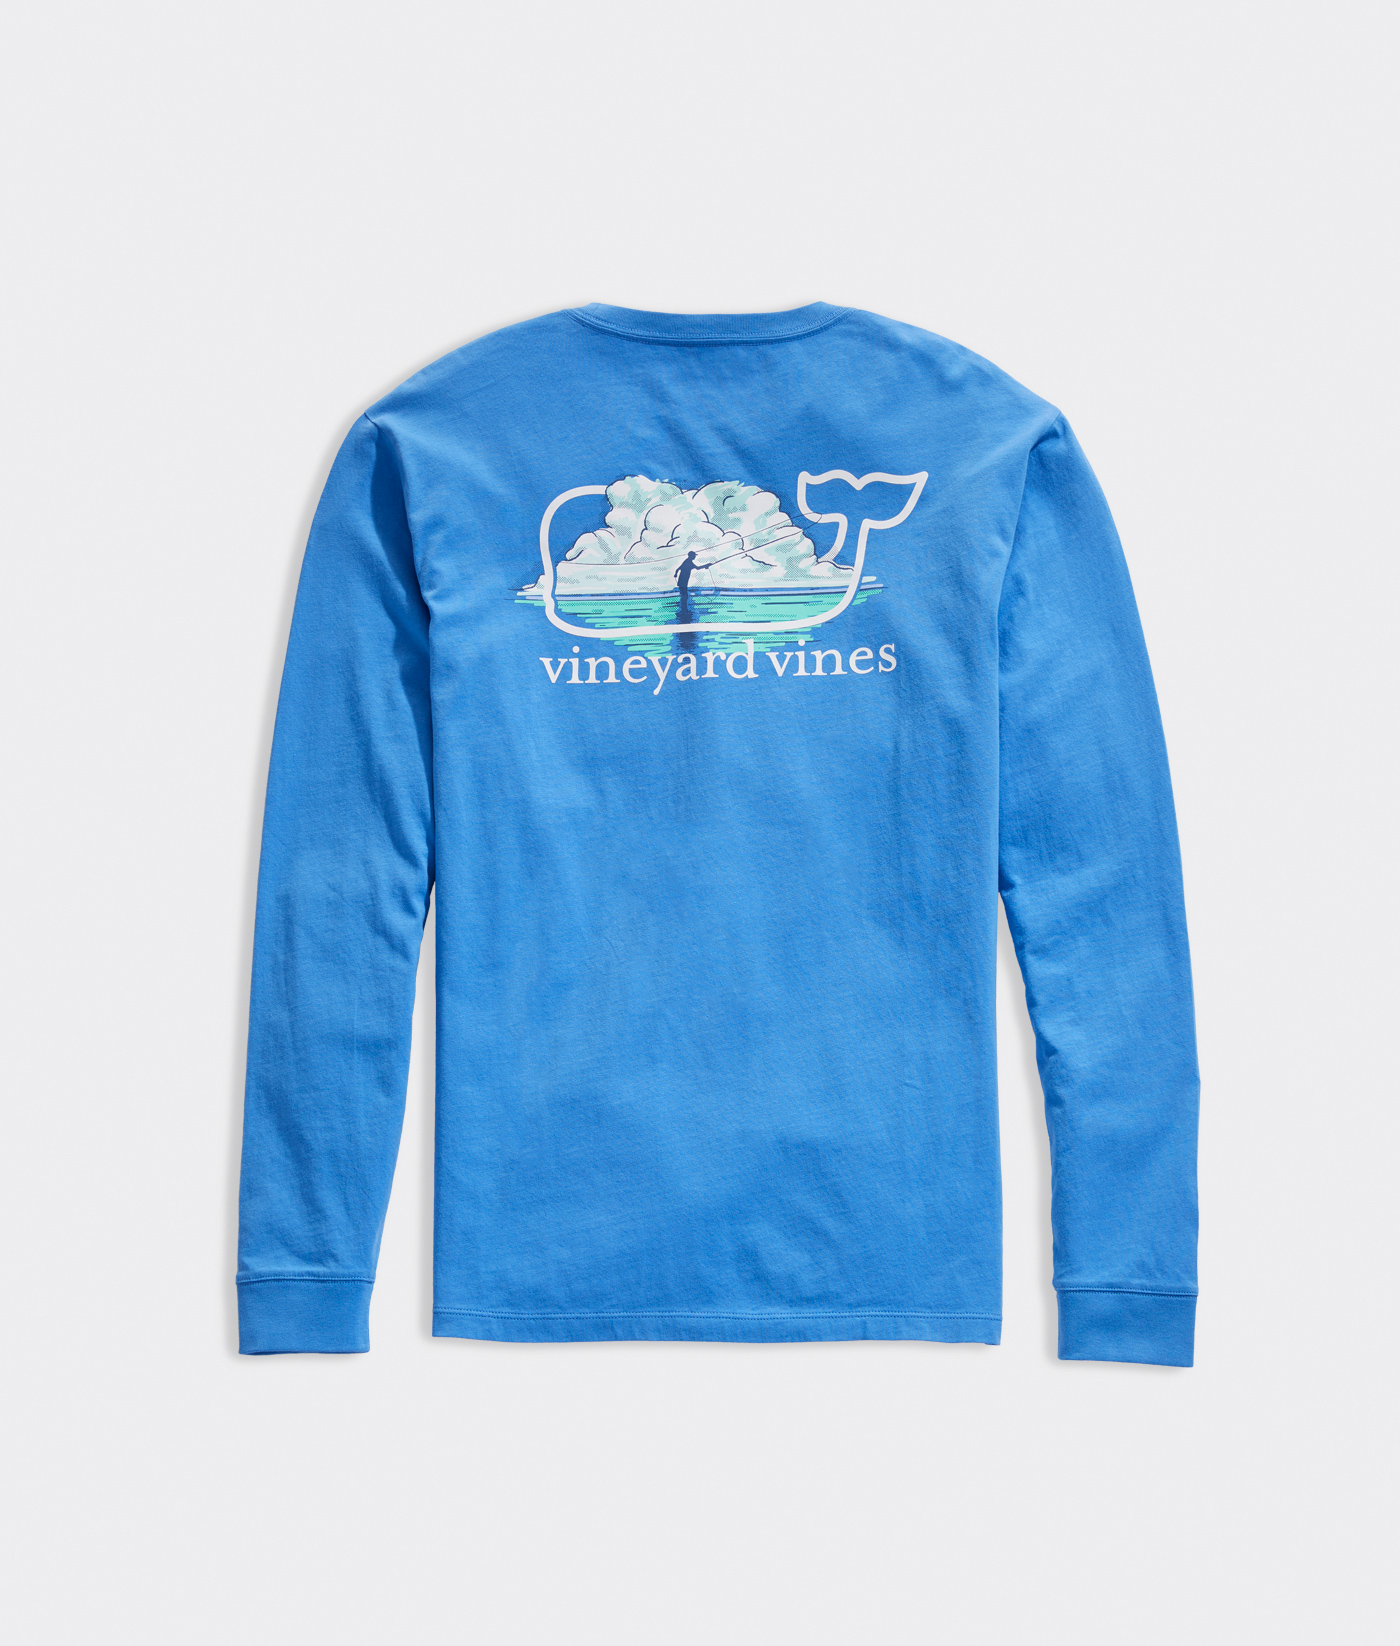 Shop OUTLET Casting Whale Fill Long-Sleeve Pocket Tee at vineyard vines